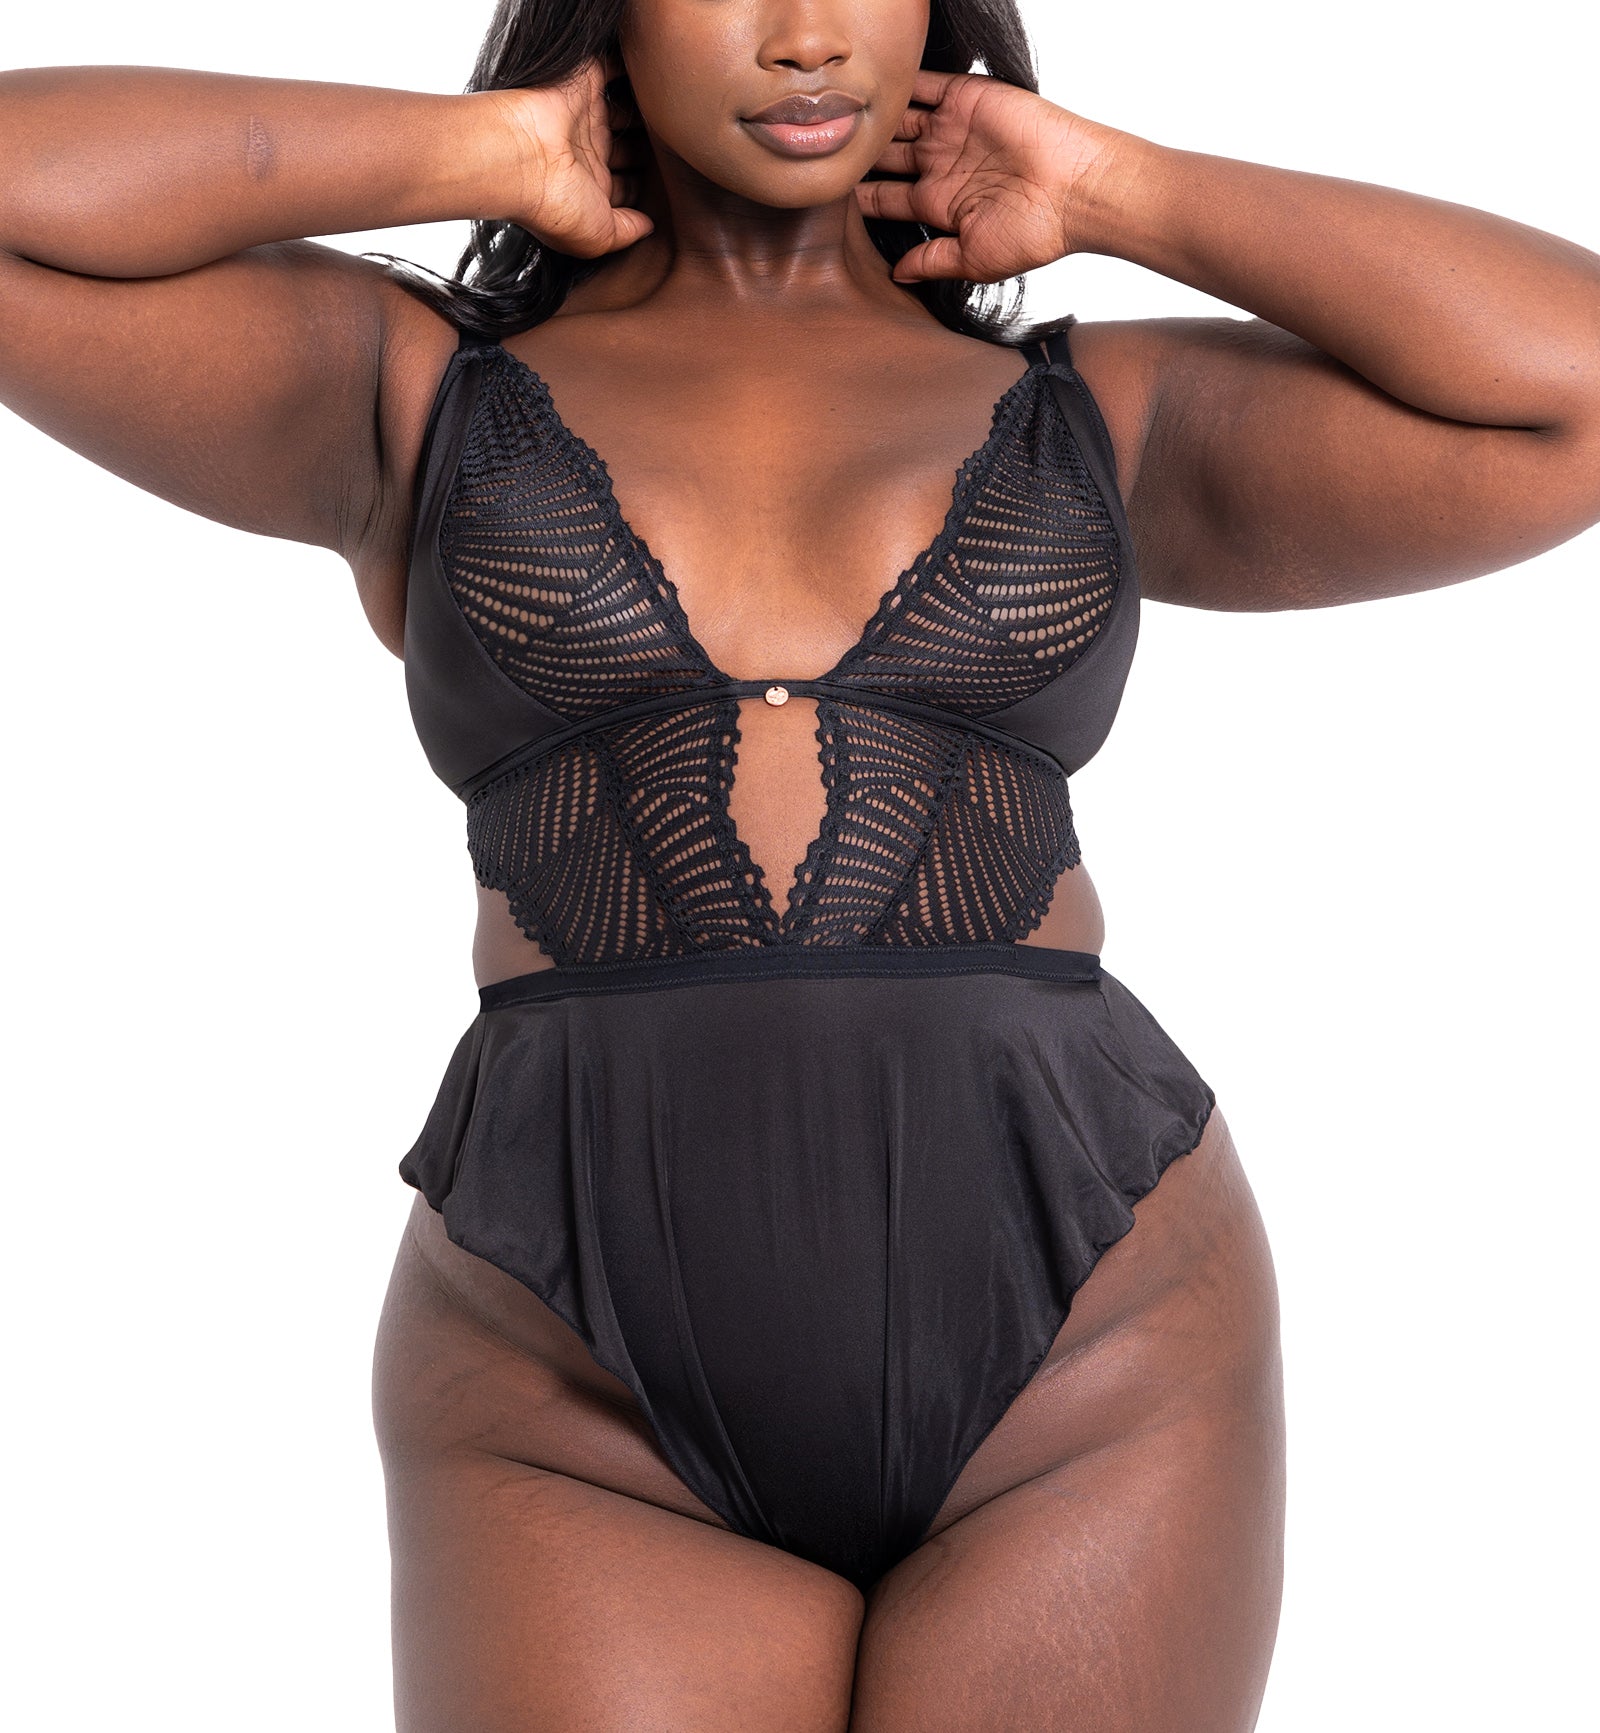 Scantilly by Curvy Kate After Hours Stretch Lace Teddy (SN025327),Small,Black - Black,Small